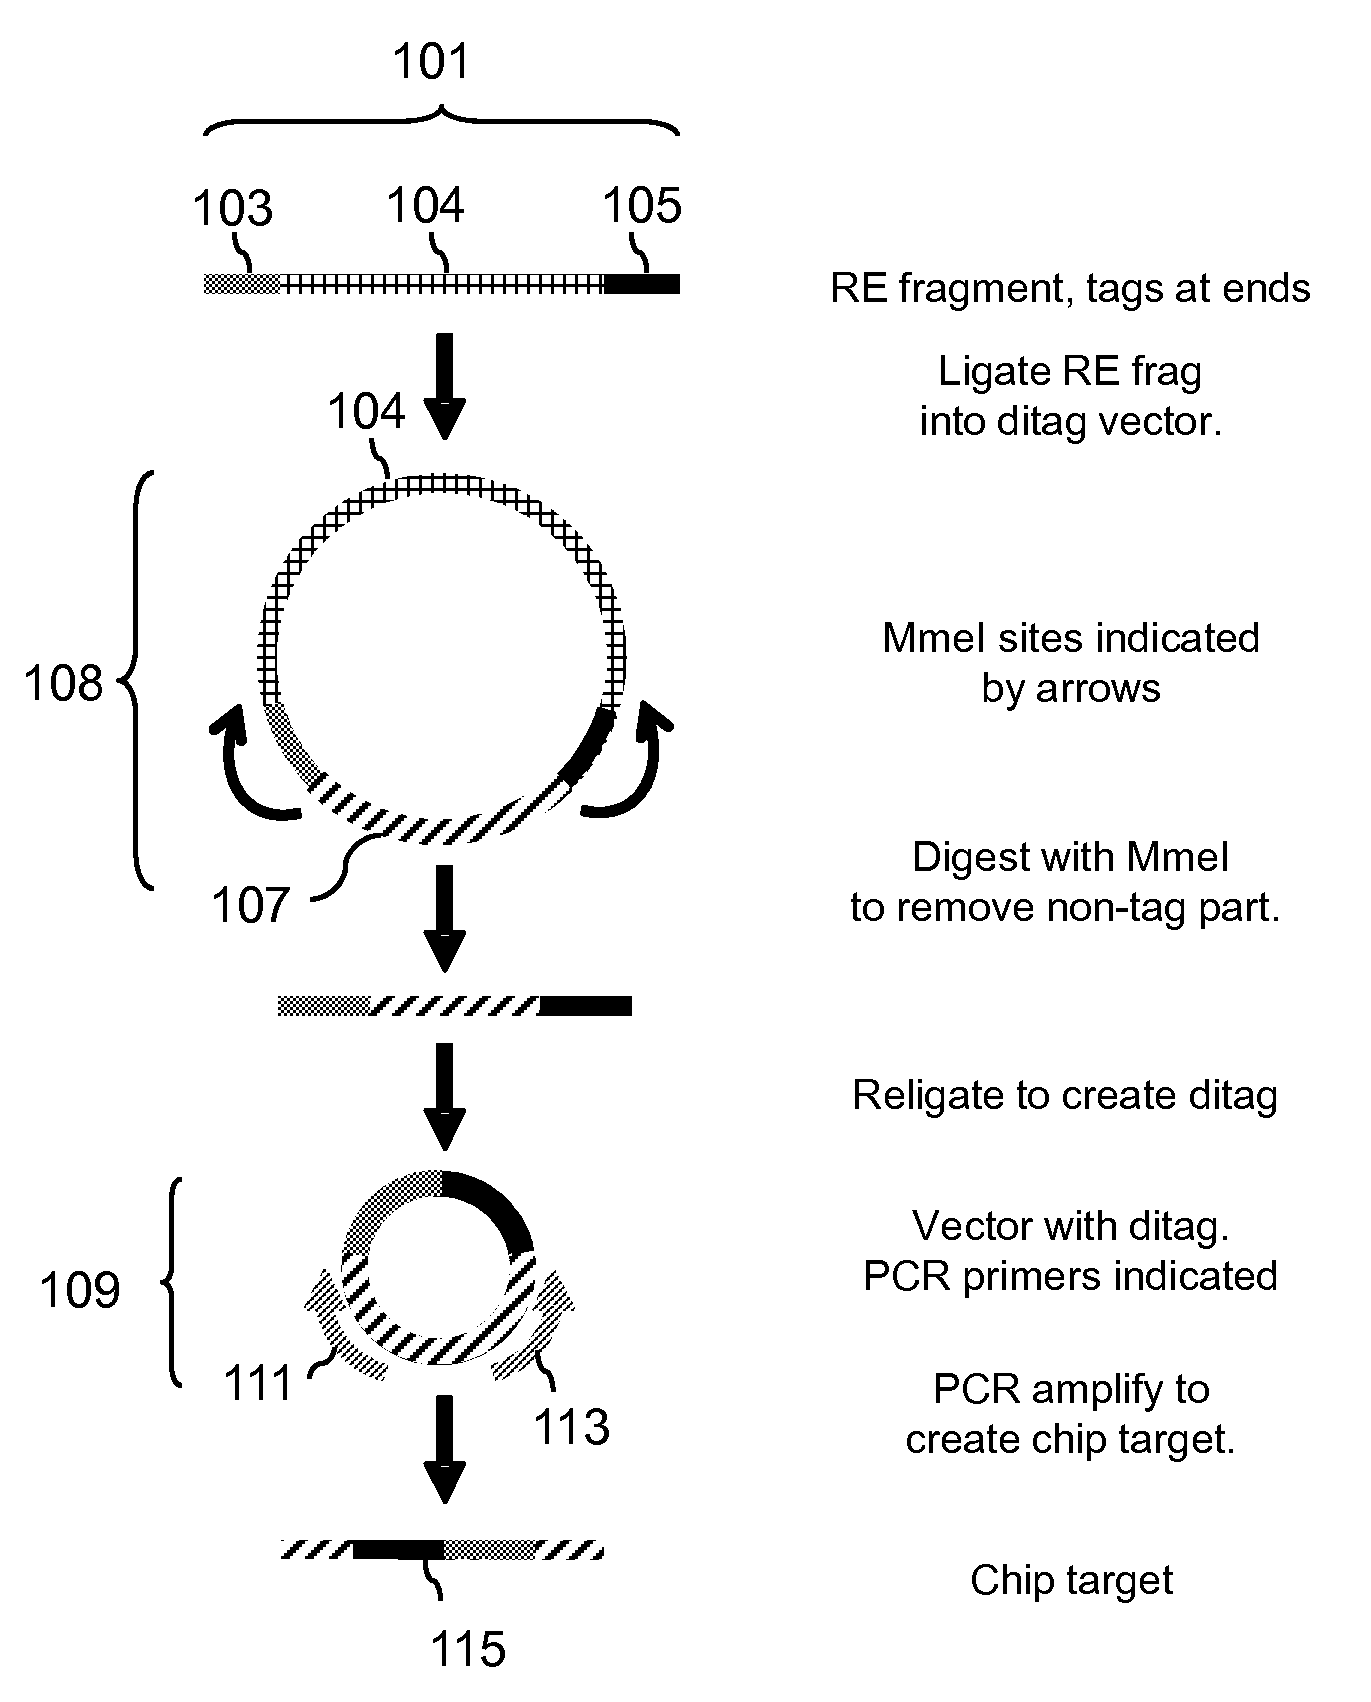 Array-based translocation and rearrangement assays